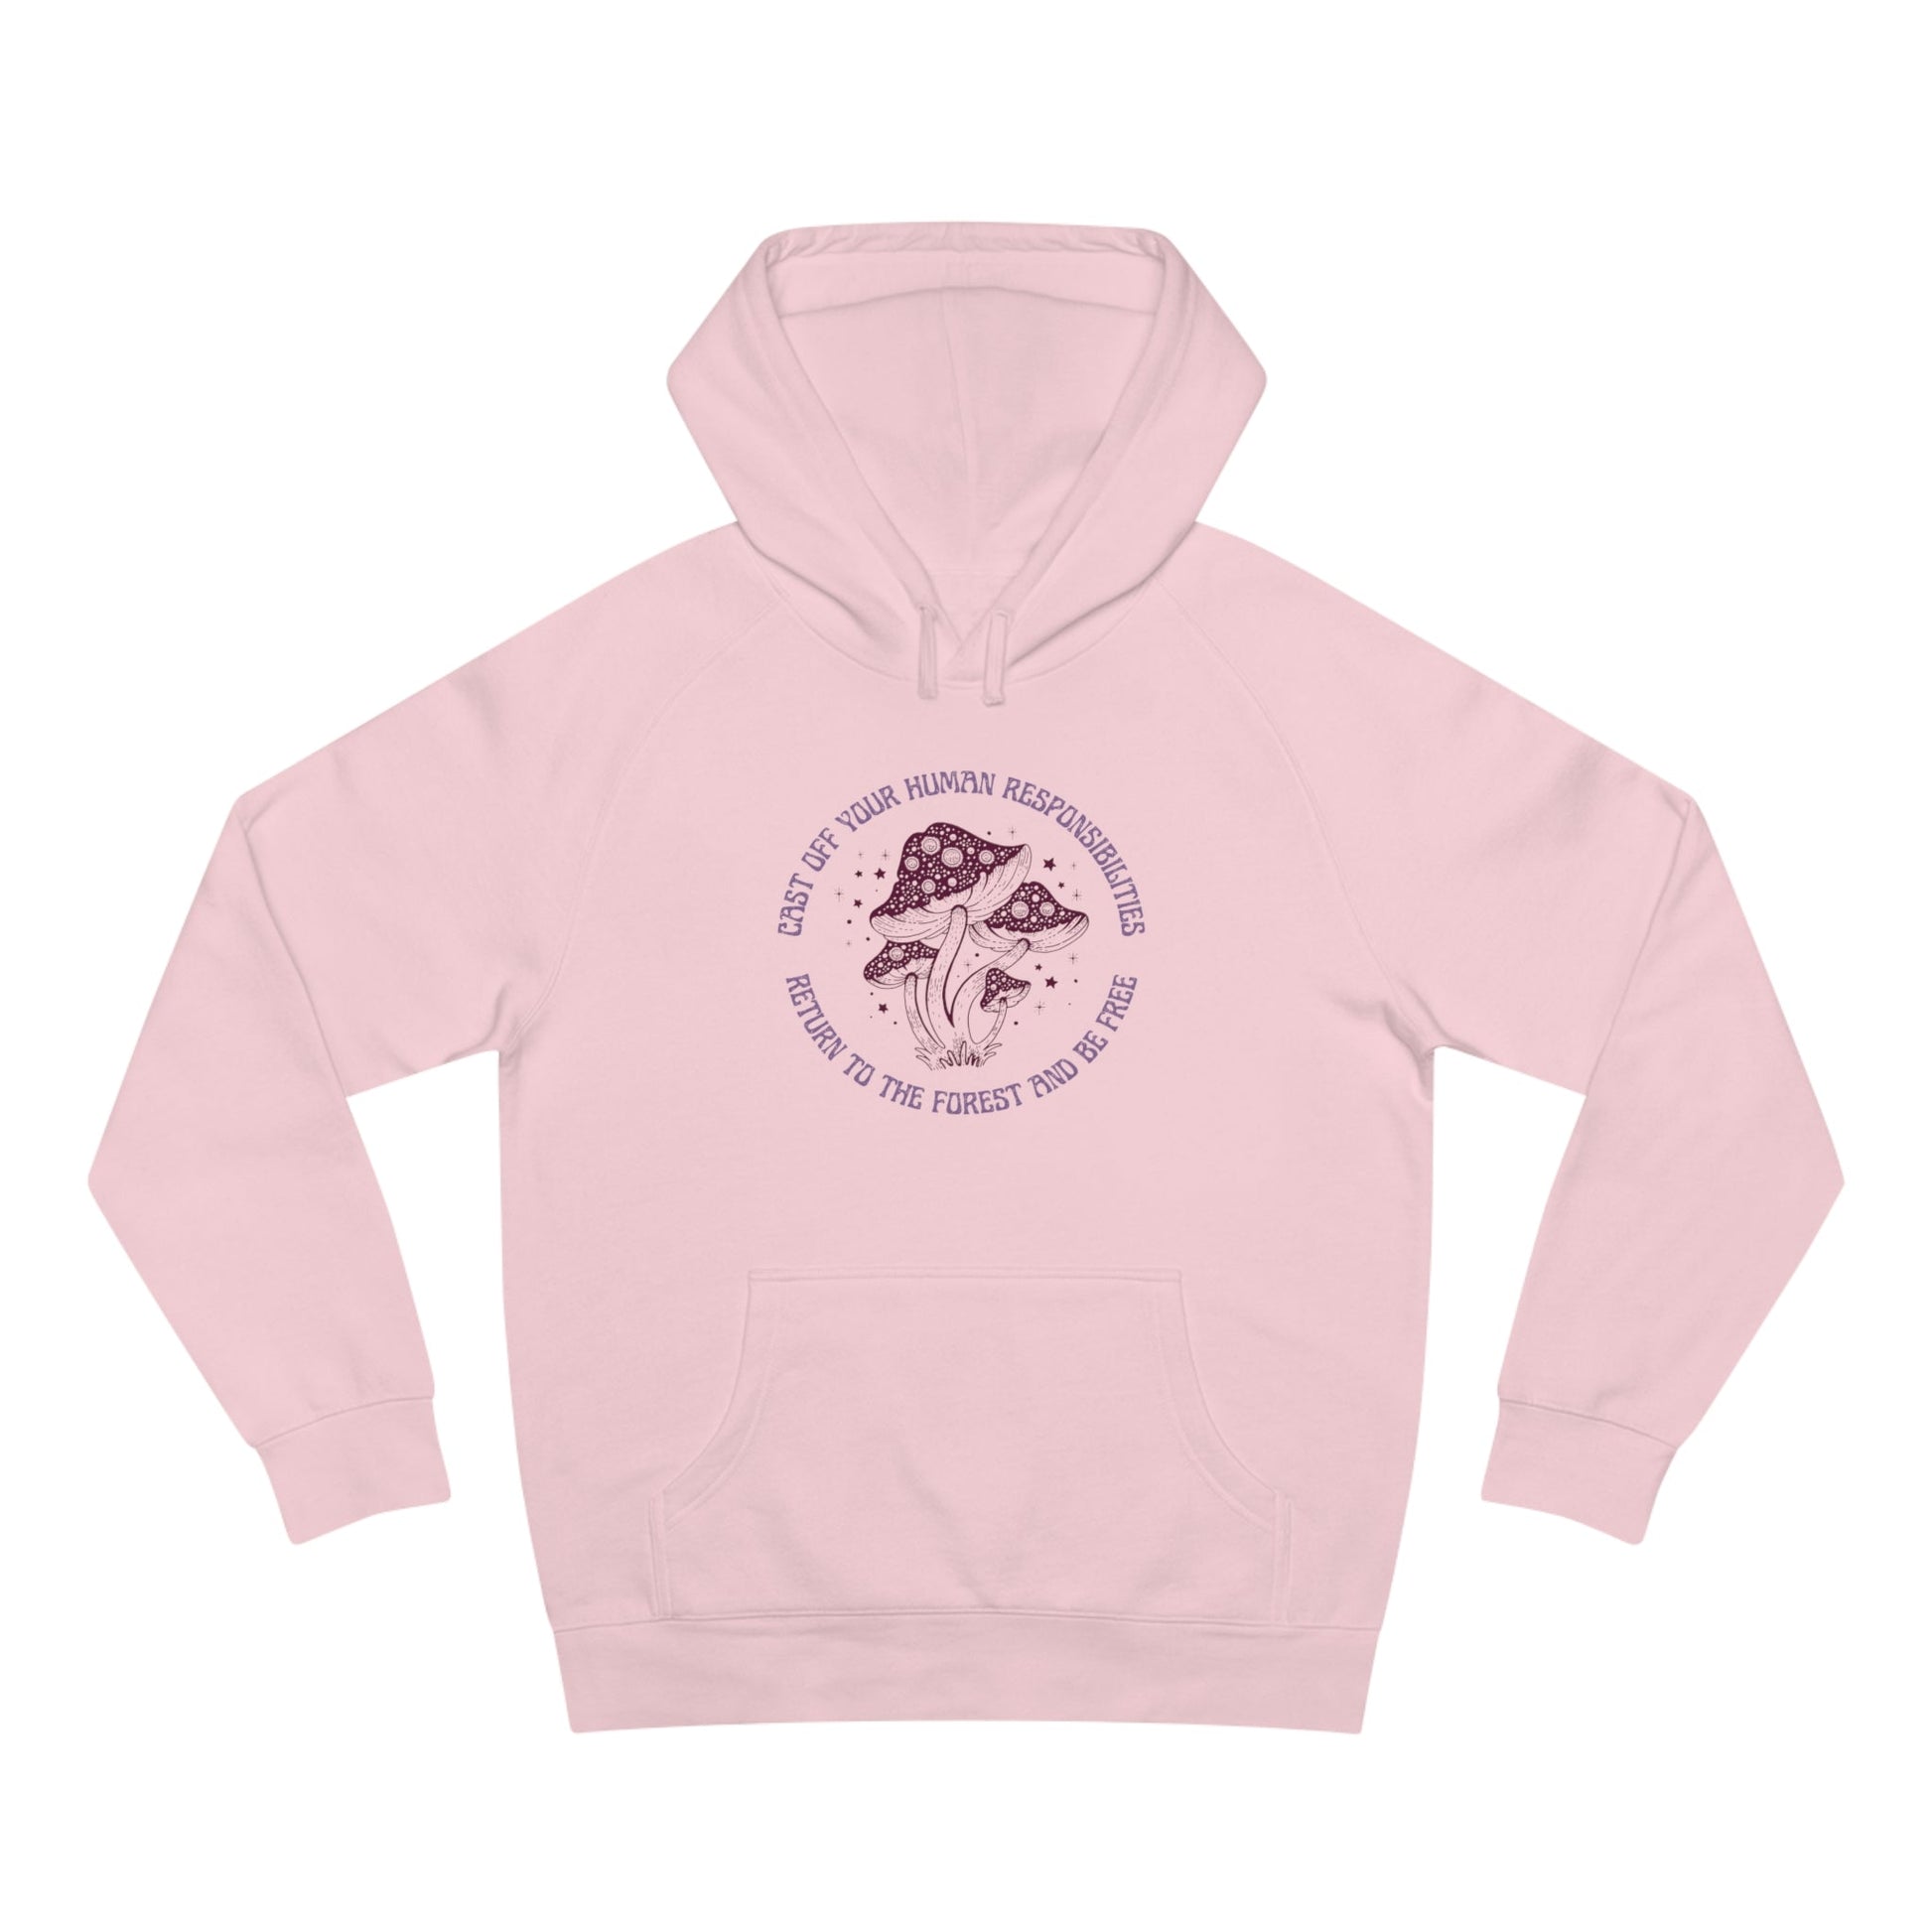 Cast Off Your Human Responsibilities Return to the Forest Unisex Supply Hoodie Sizes S-3X